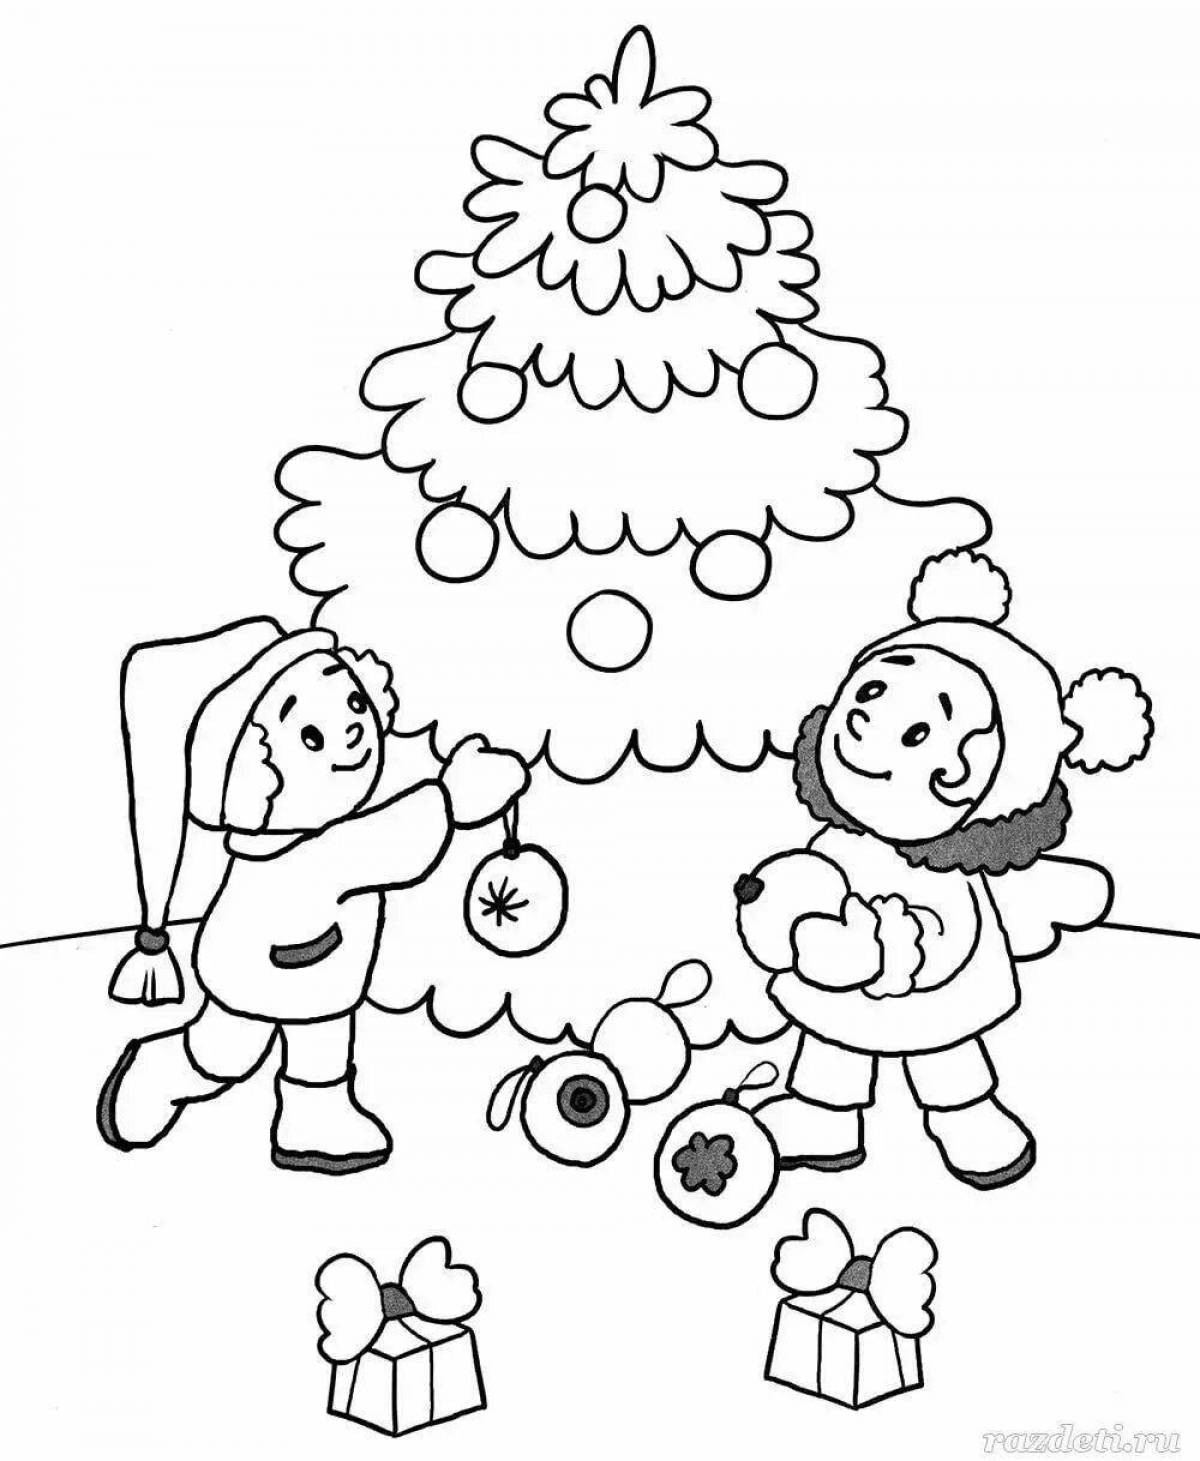 Wonderful Christmas coloring book for kids 3-4 years old